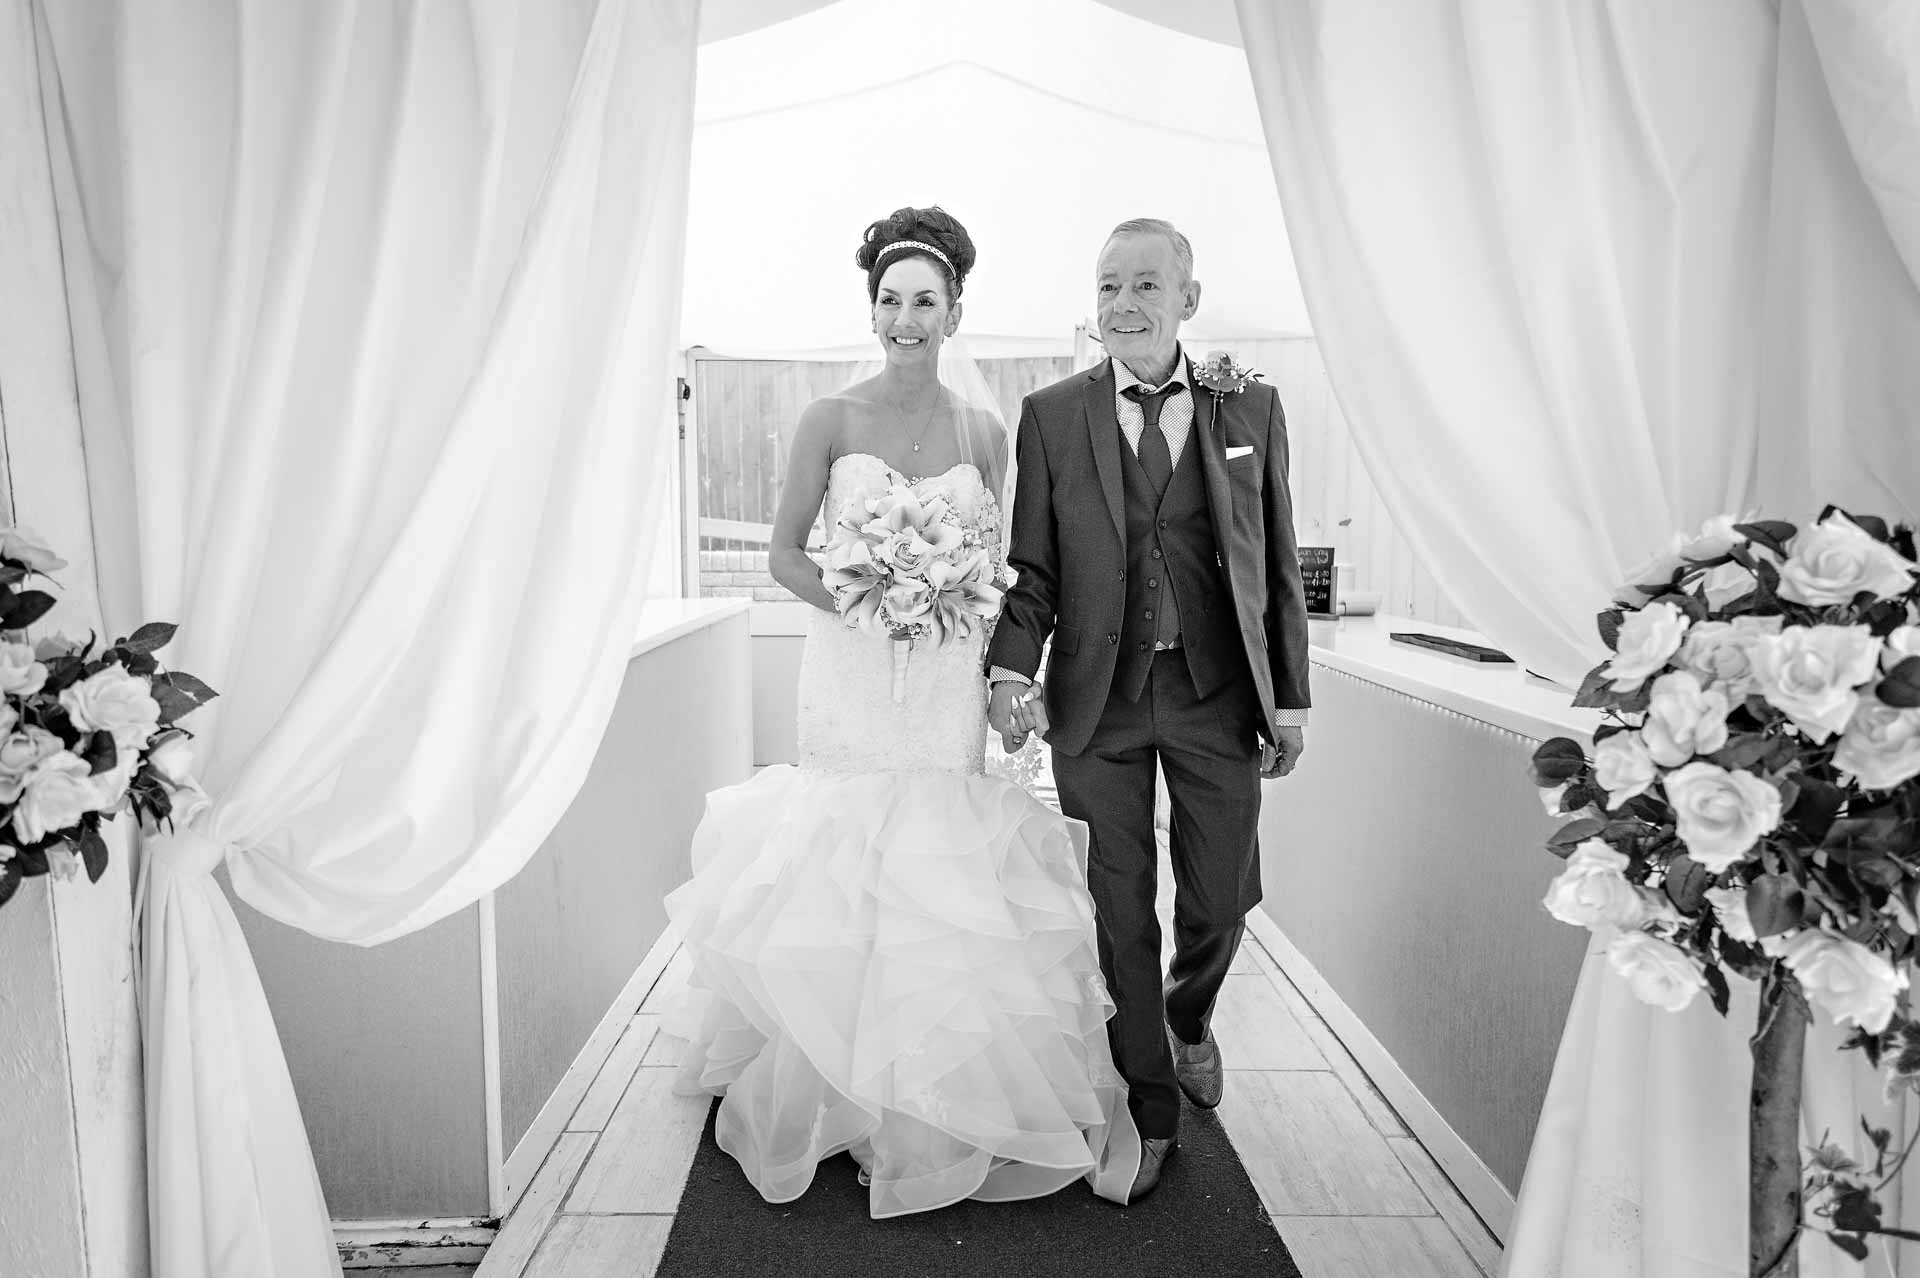 The bride and her father entering the Marquee at Ridgeway Golf Club